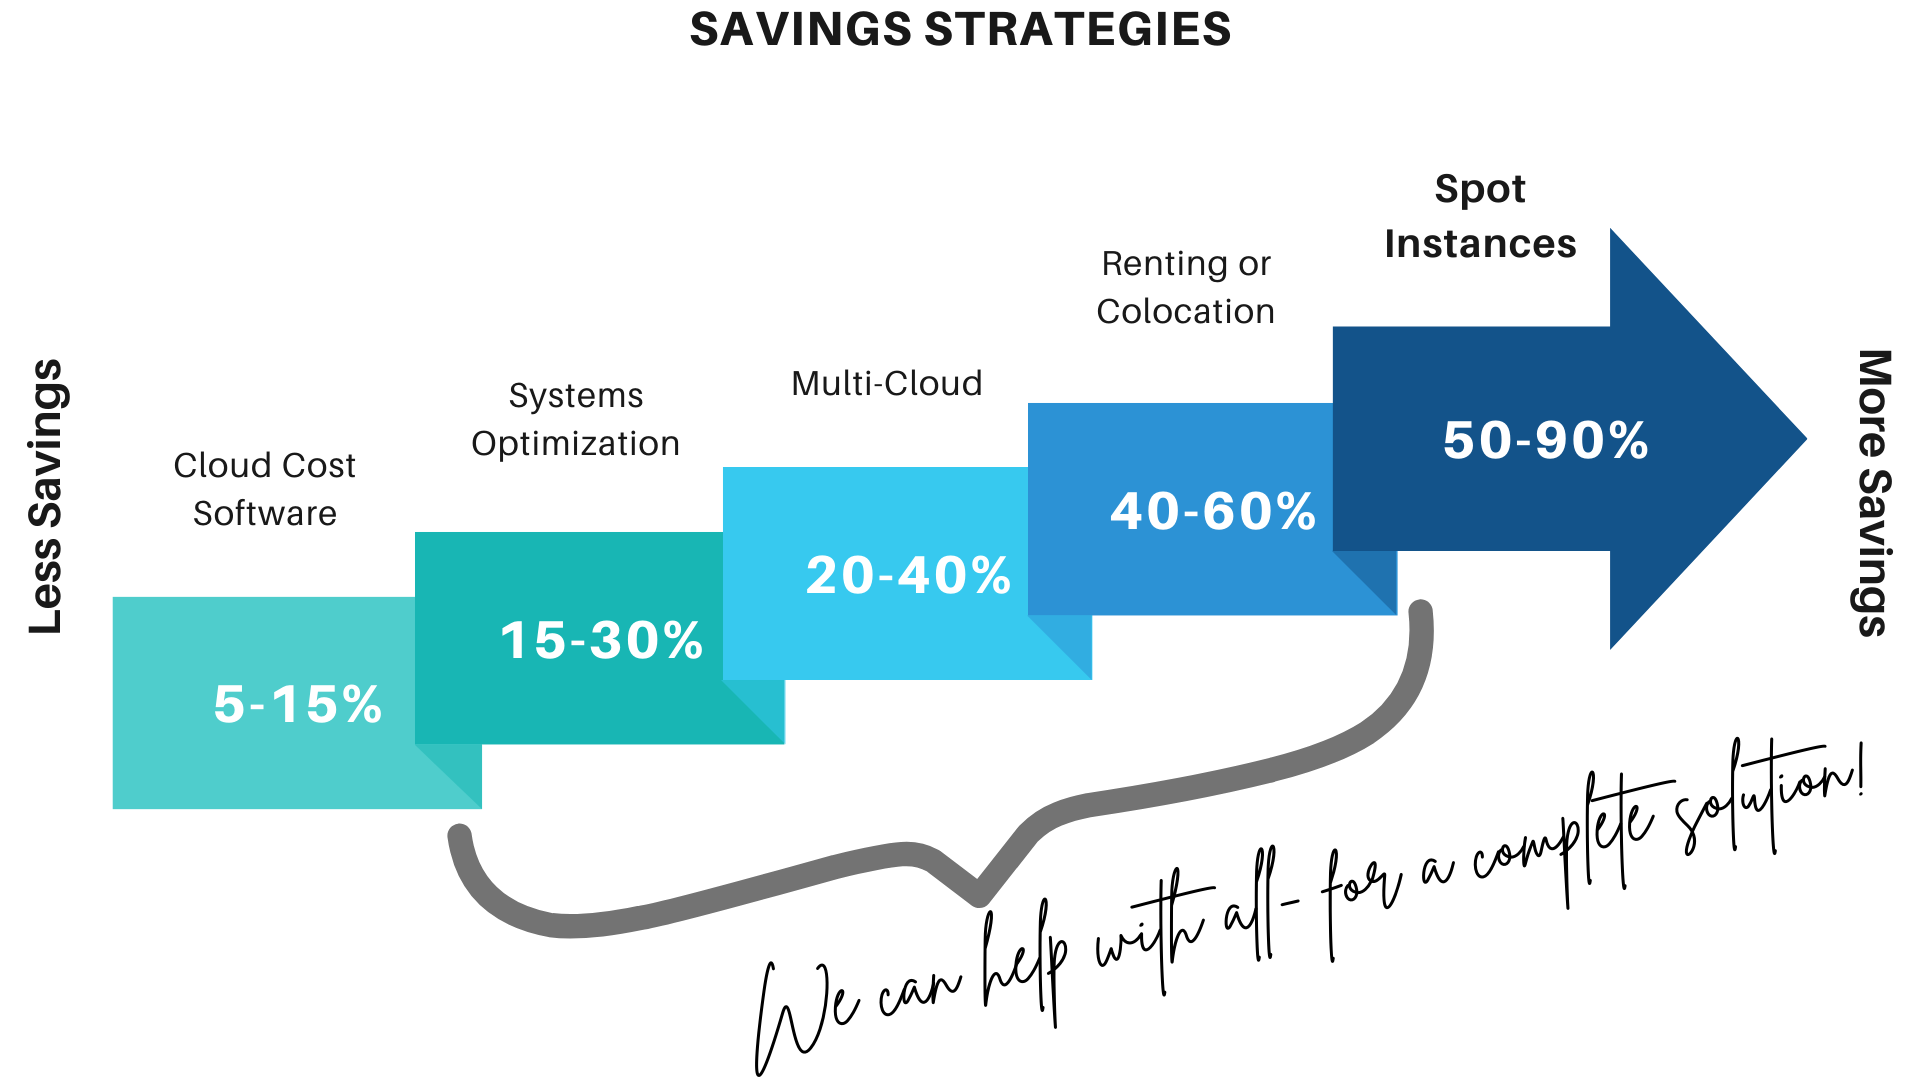 Savings Strategies. Cloud Cost Software 5-15%, System Optimization 15-30%, Multi-Cloud 20-40%, Renting or Colocation 40-60%, Spot Instances 50-90%. We can help with all - for a complete solution.